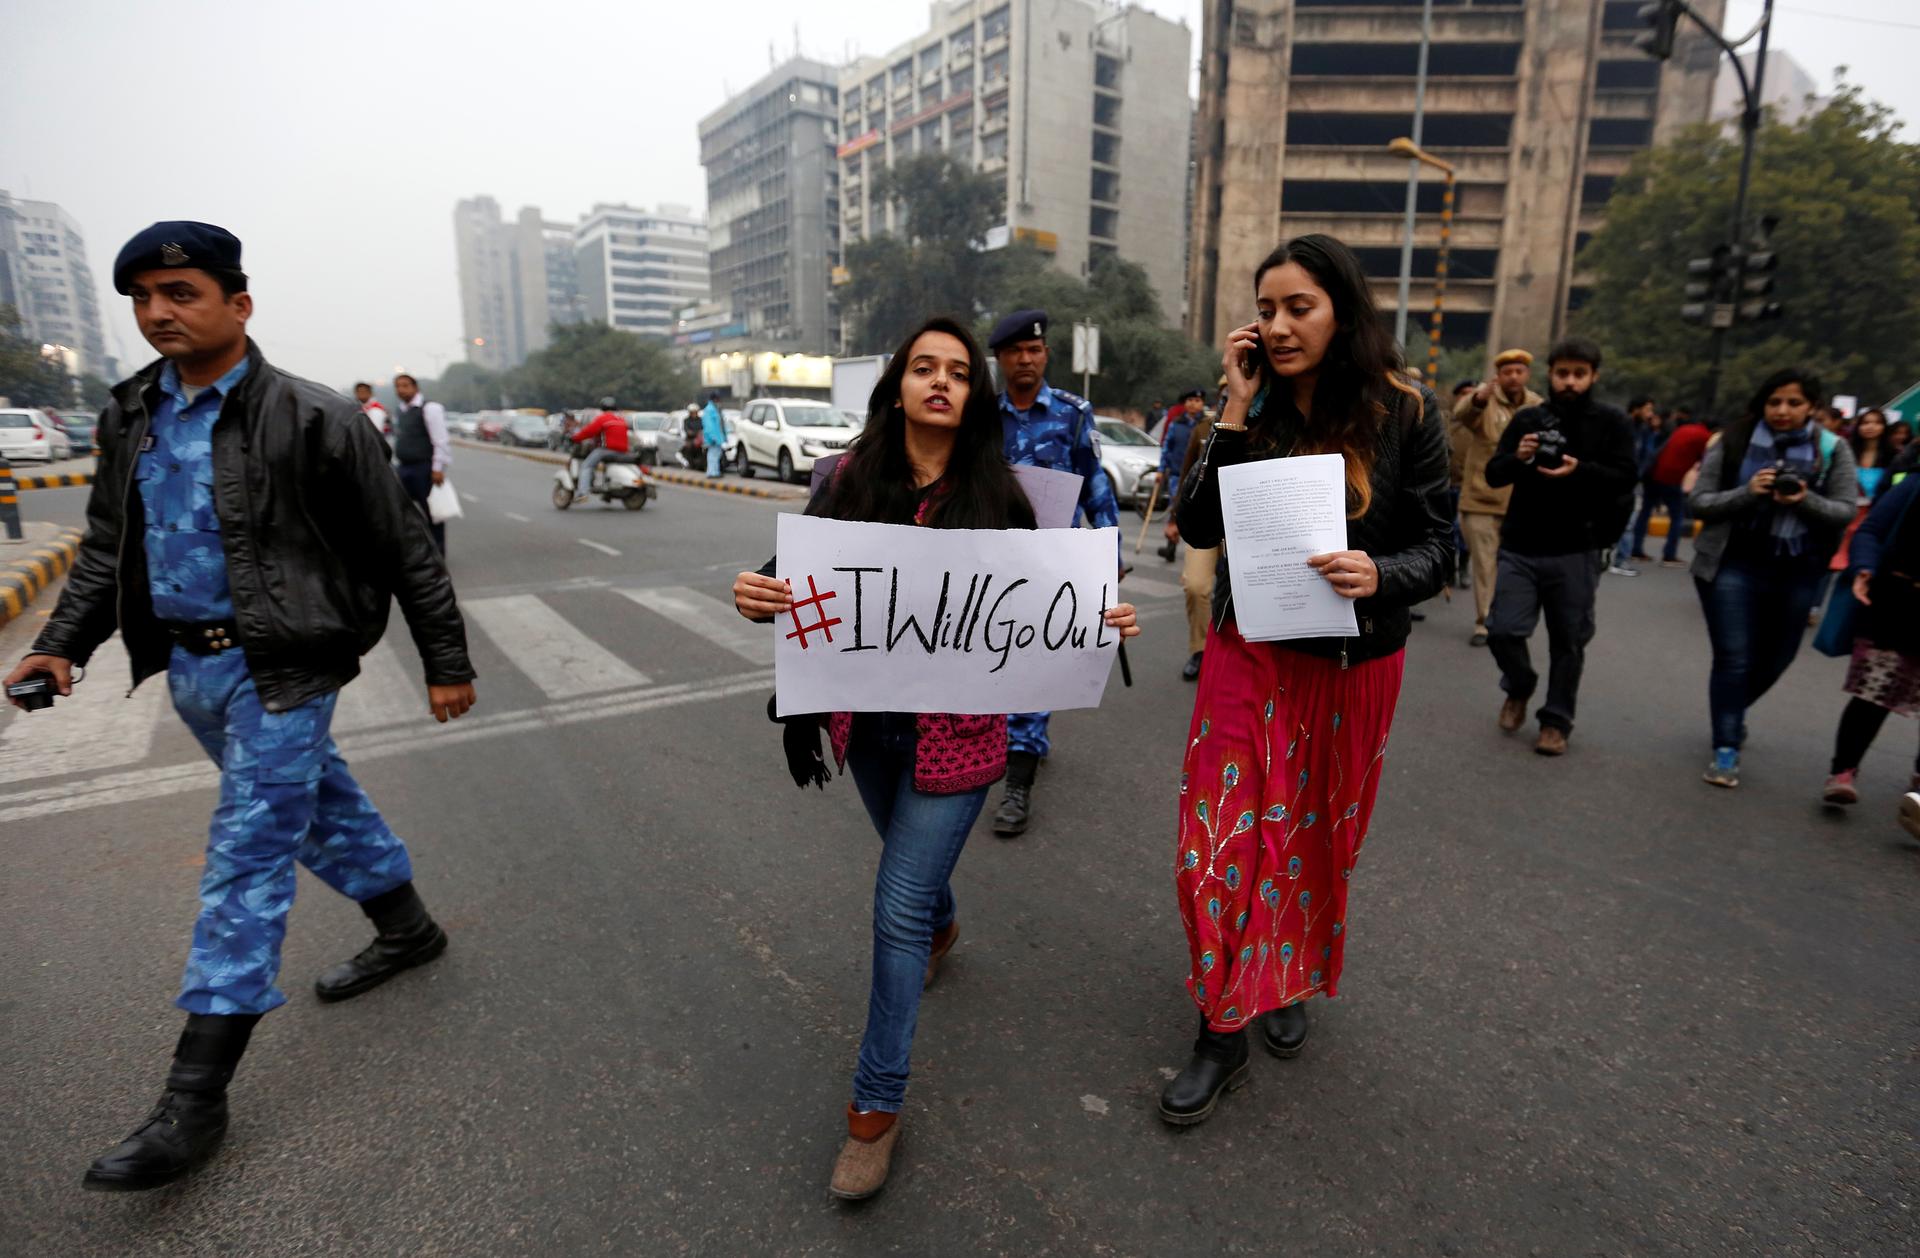 Women take part in the #IWillGoOut rally, organized to show solidarity with the Women's March in Washington, along a street in New Delhi, India